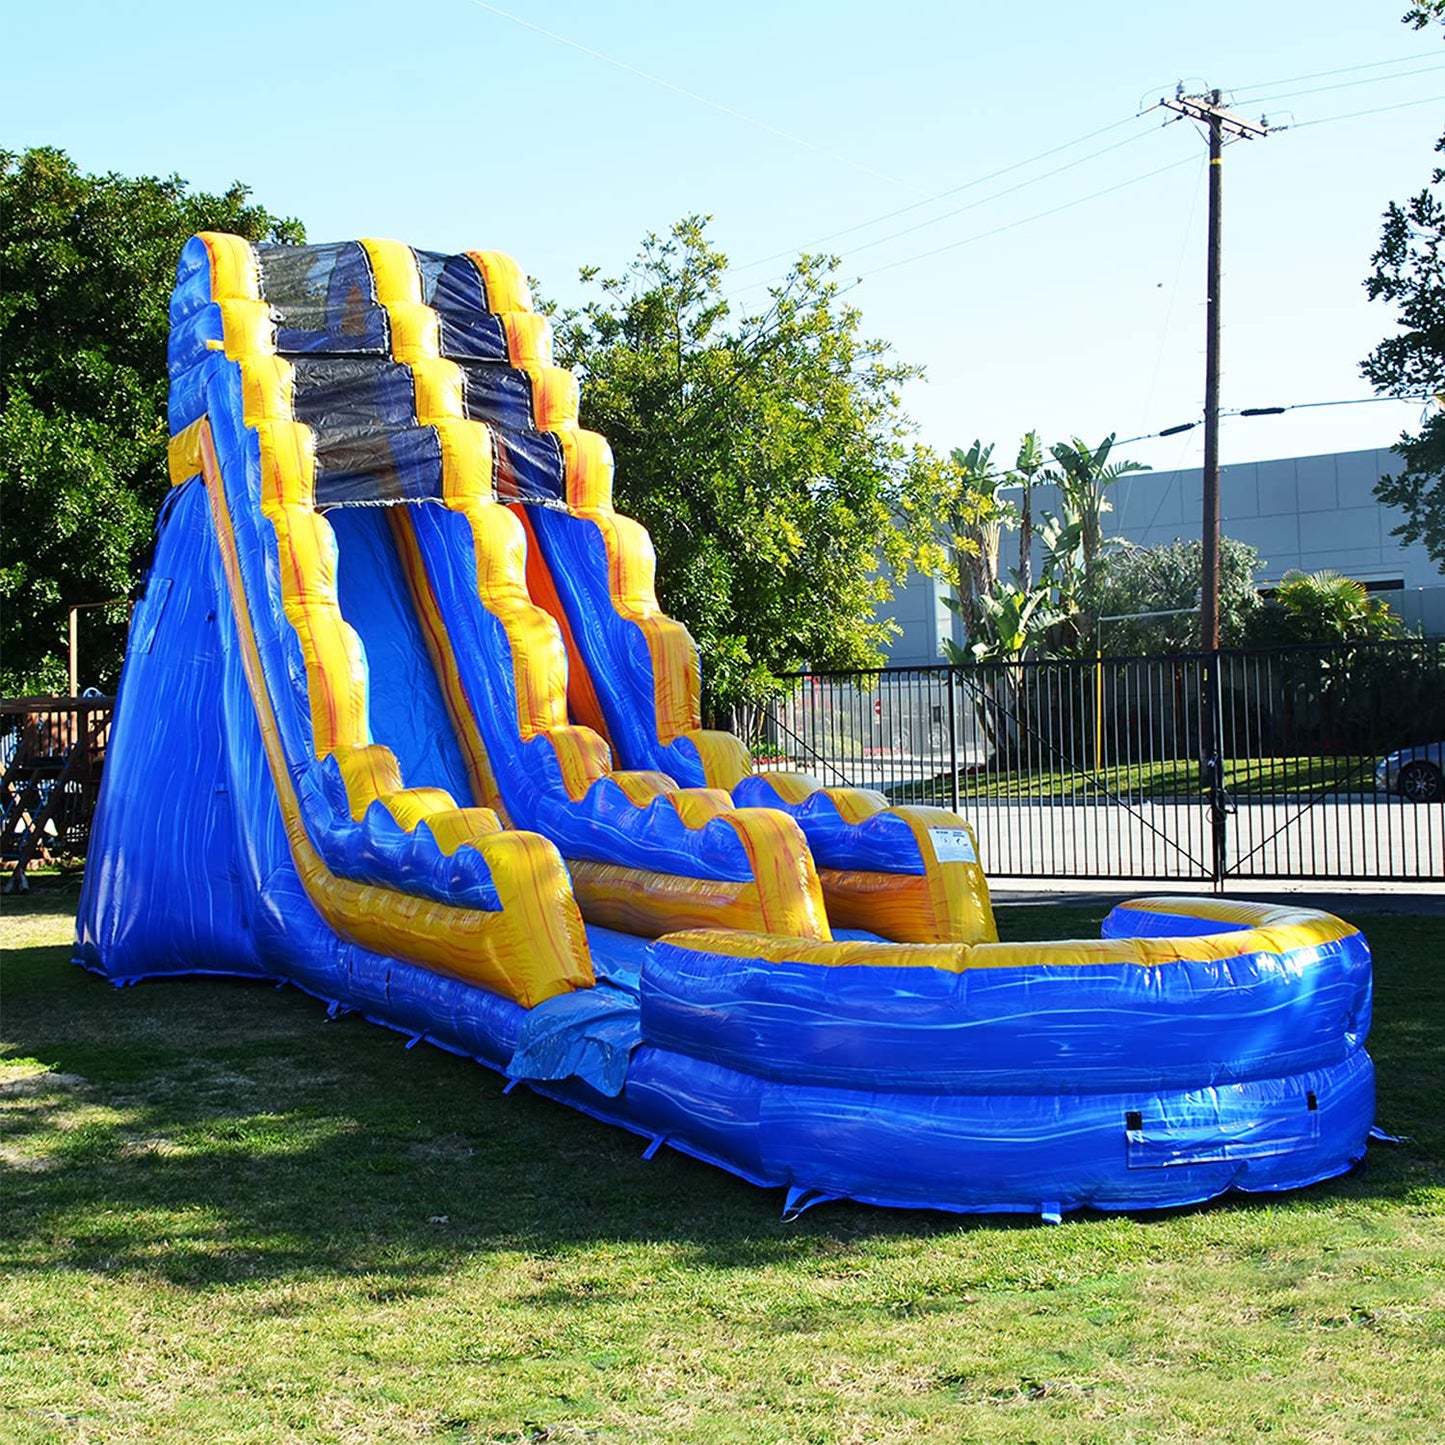 JumpOrange 19’ Melting Artic Commercial Grade Water Slide Inflatable with Attached Deep Pool for Kids and Adults (with Blower), Wet Dry Combo, Summer Fun, Outdoor, Summer Fun, Backyard Water Park